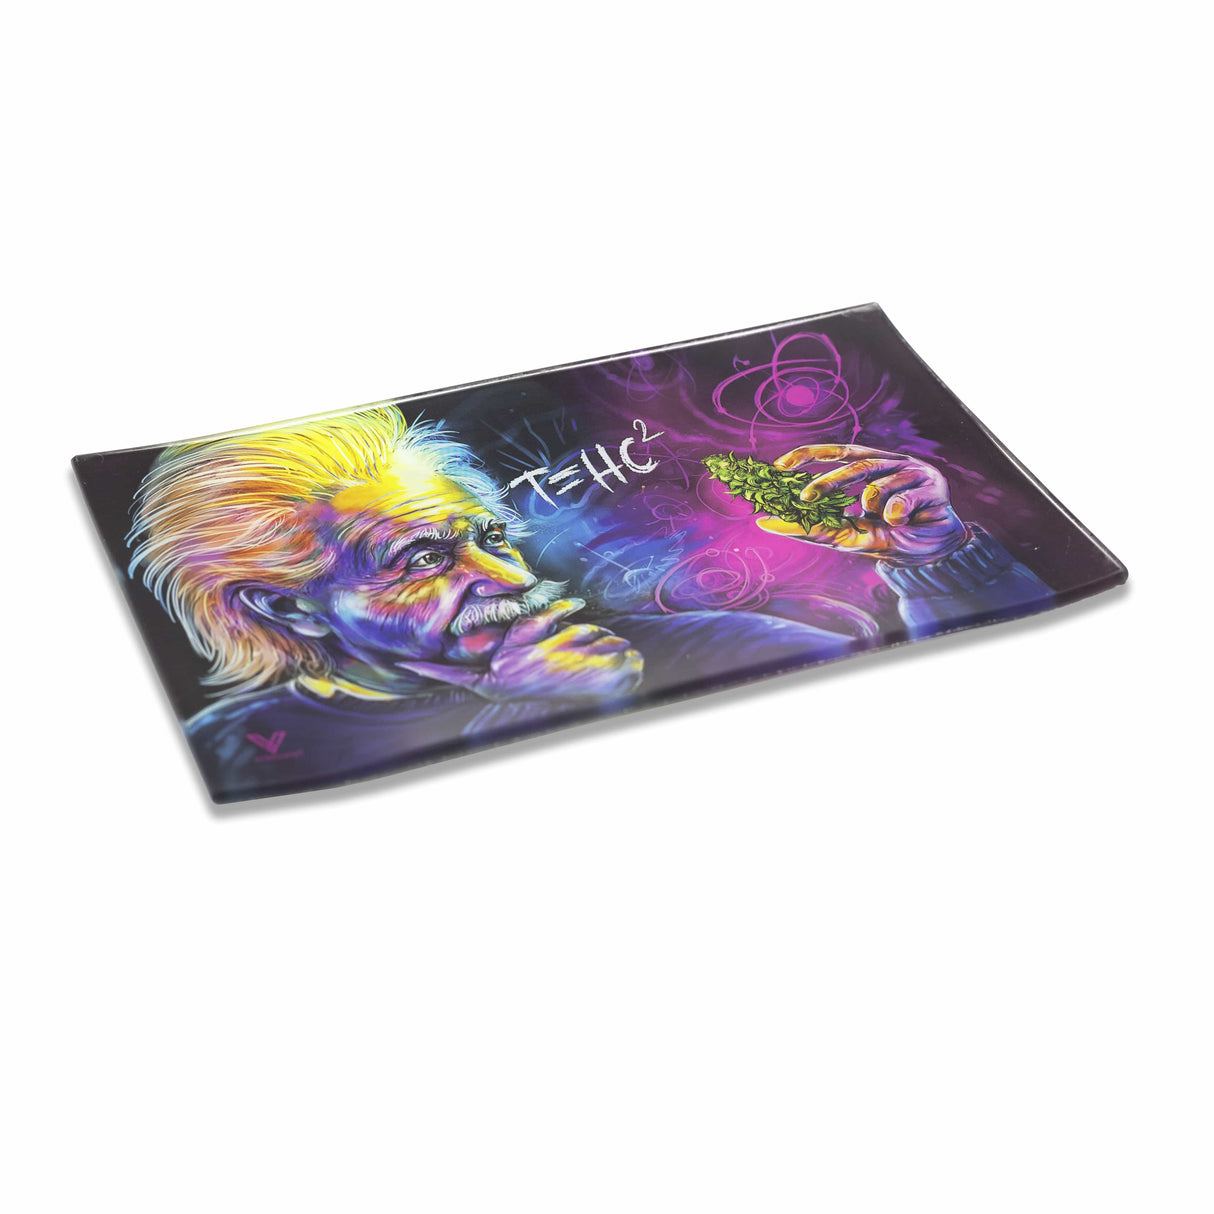 V Syndicate T=HC2 Einstein-themed Glass Rollin' Tray in Black and Purple